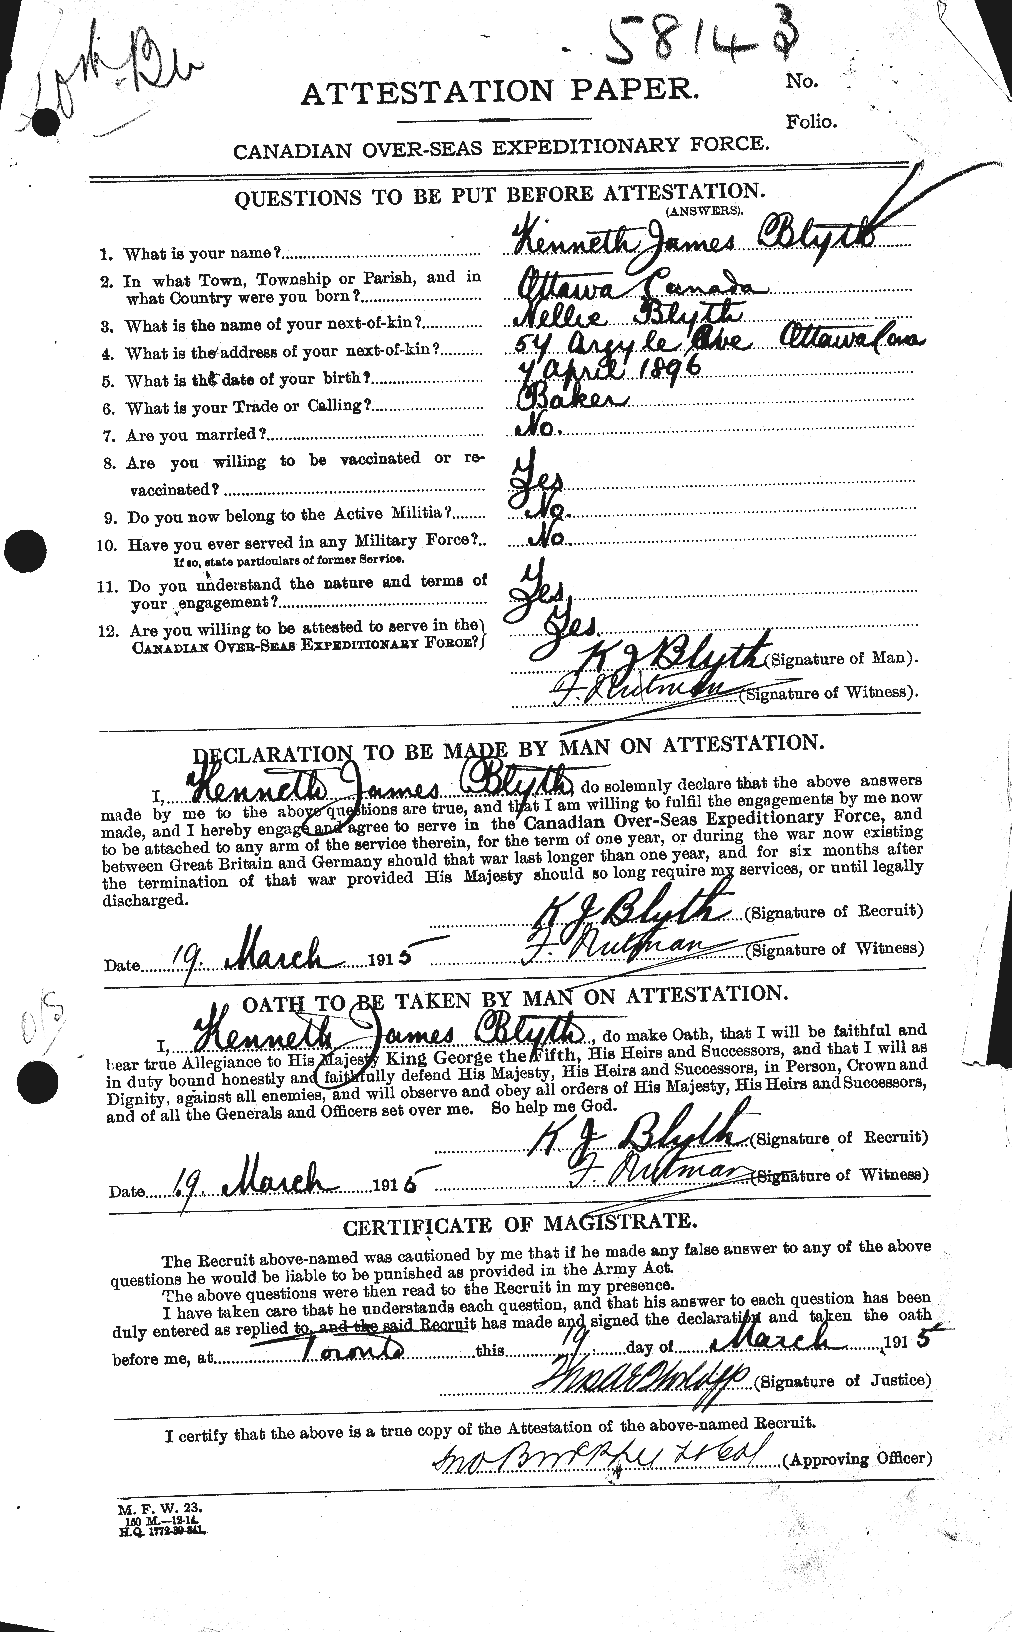 Personnel Records of the First World War - CEF 249092a